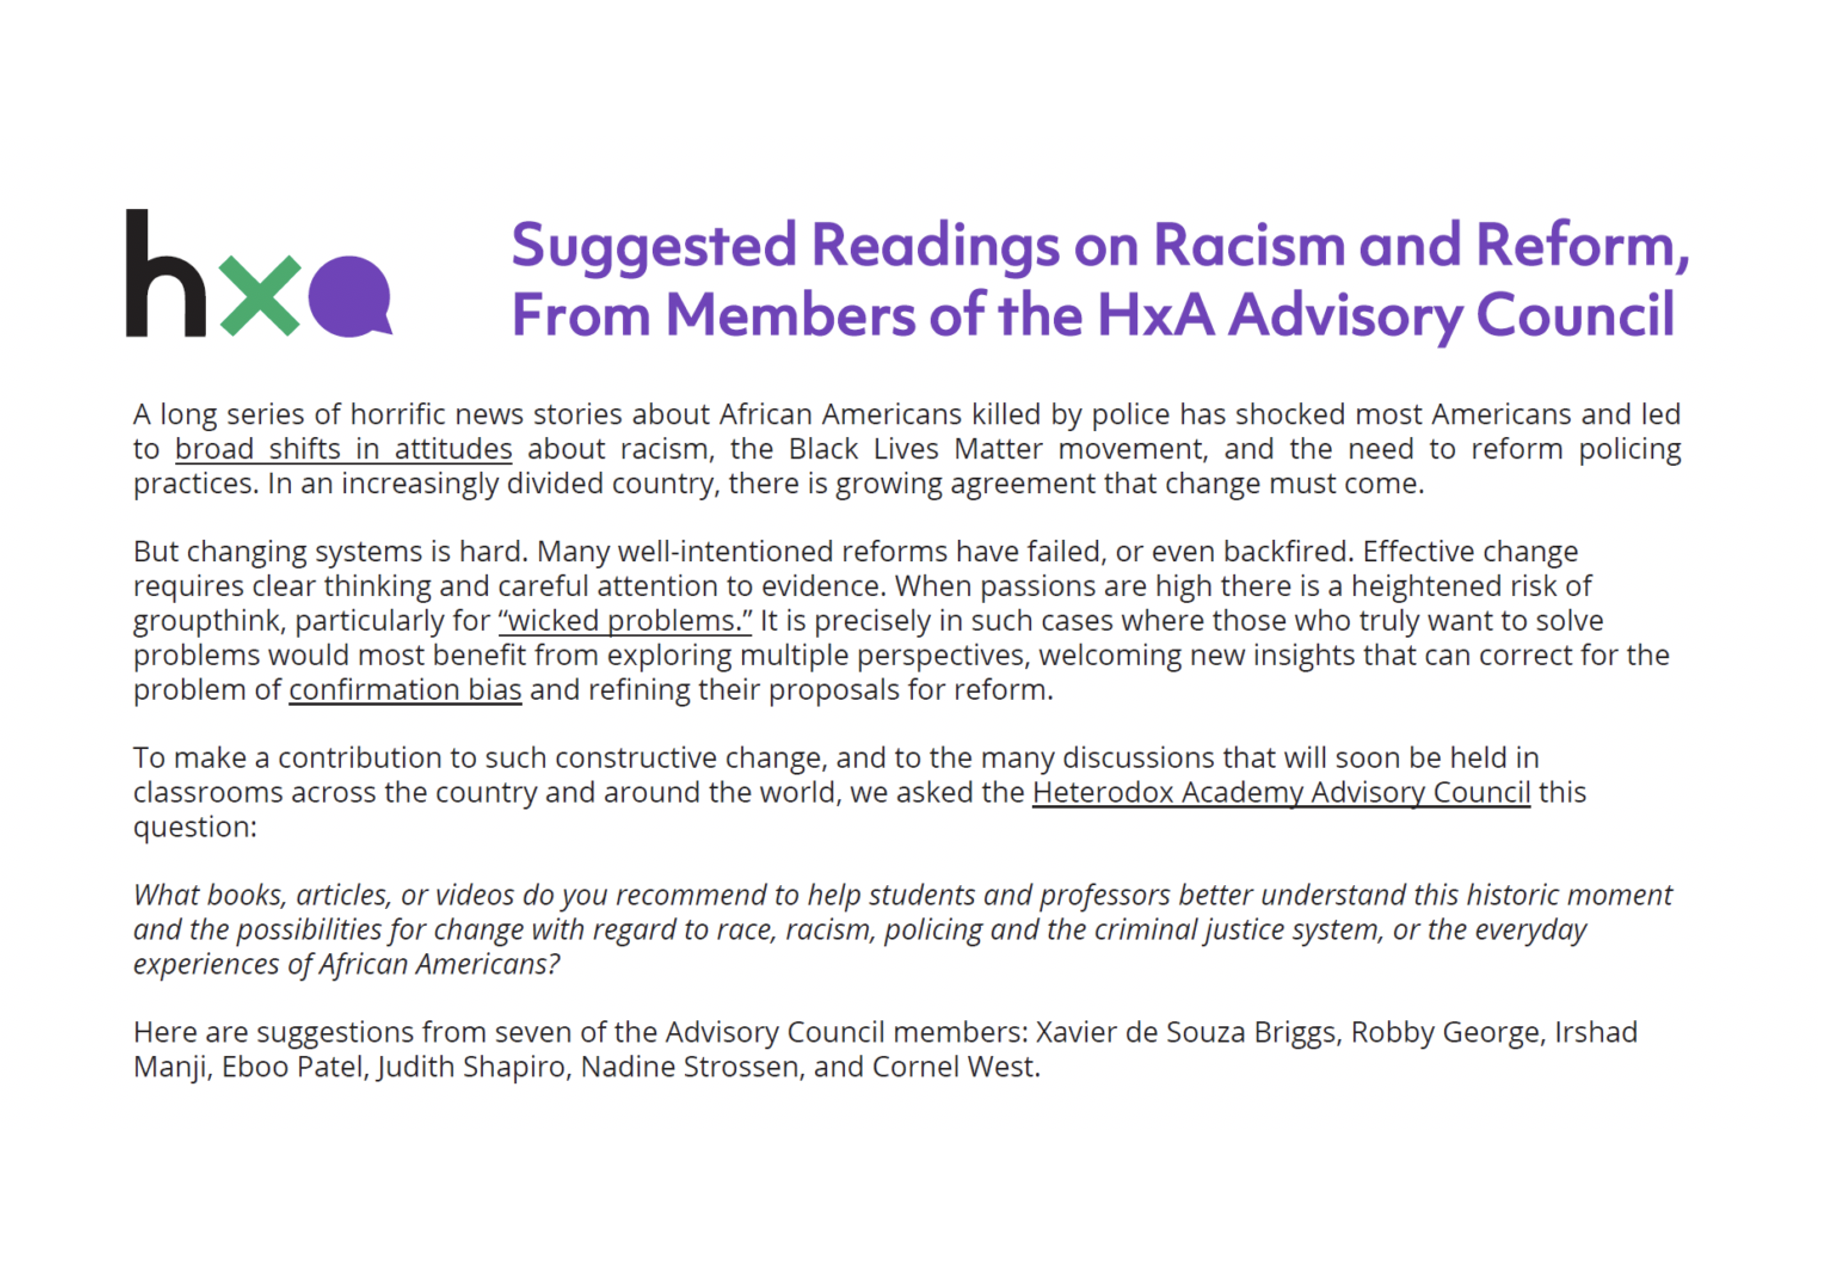 Resources and Suggested Readings on Racism, Reform, Policing, and the Criminal Justice System